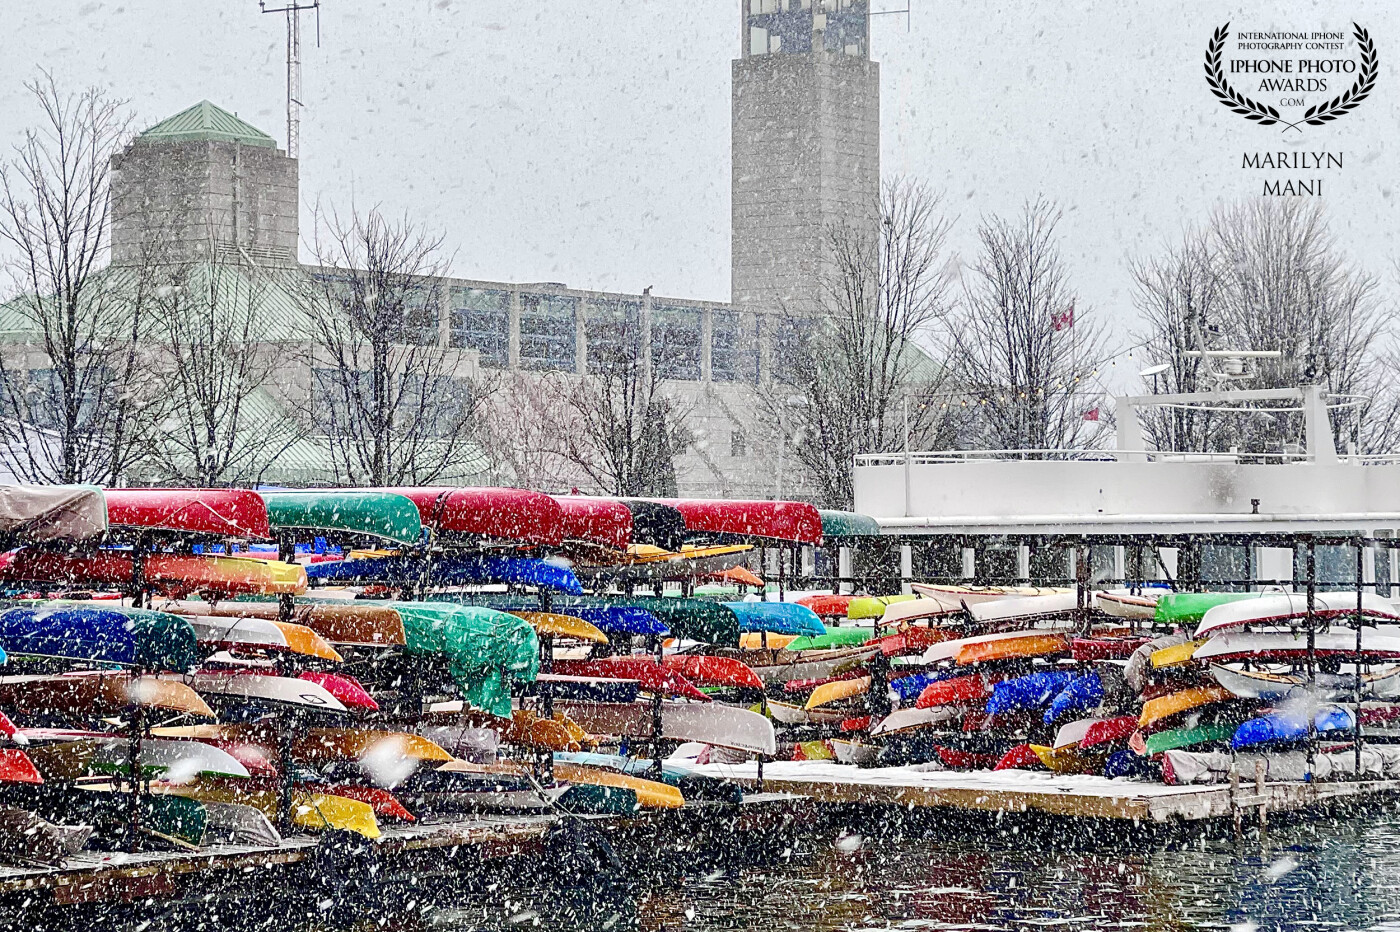 A moment from a beautifully confusing spring day! While on a walk on a spring day hoping for warmer weather I was surprised by the snowfall. The snow acts like a veil covering the colourful canoes ready for summer.